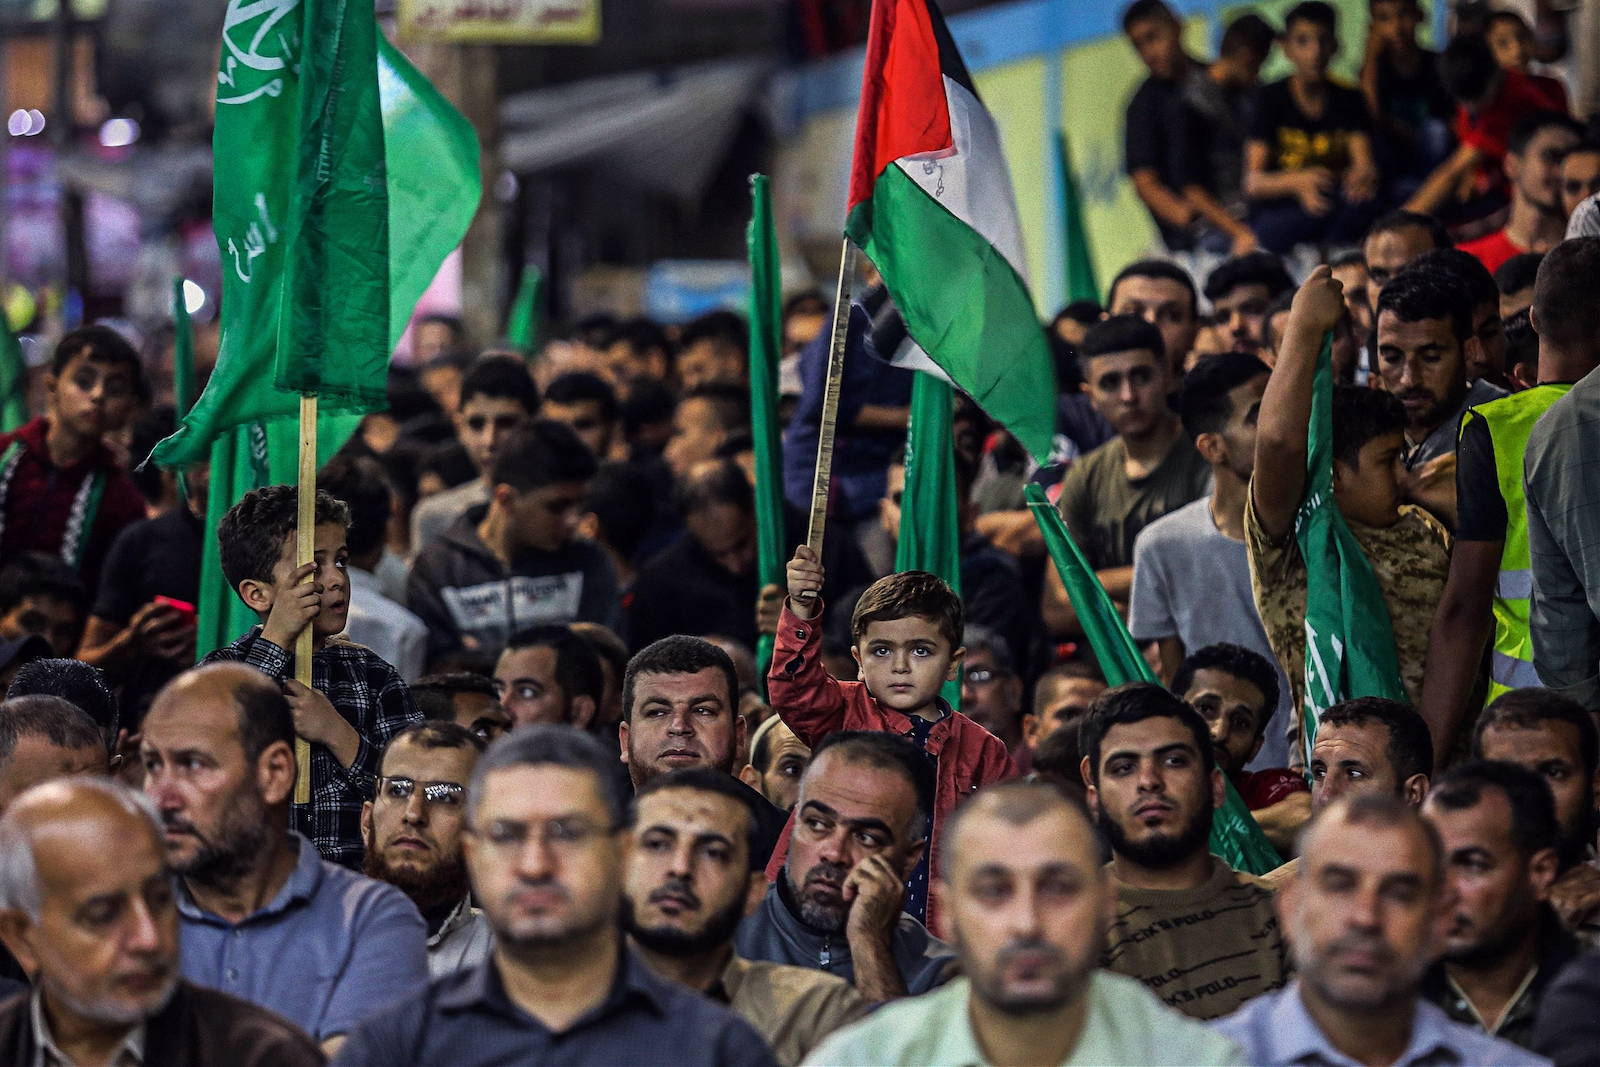 Hamas supporters marching in the Gaza Strip